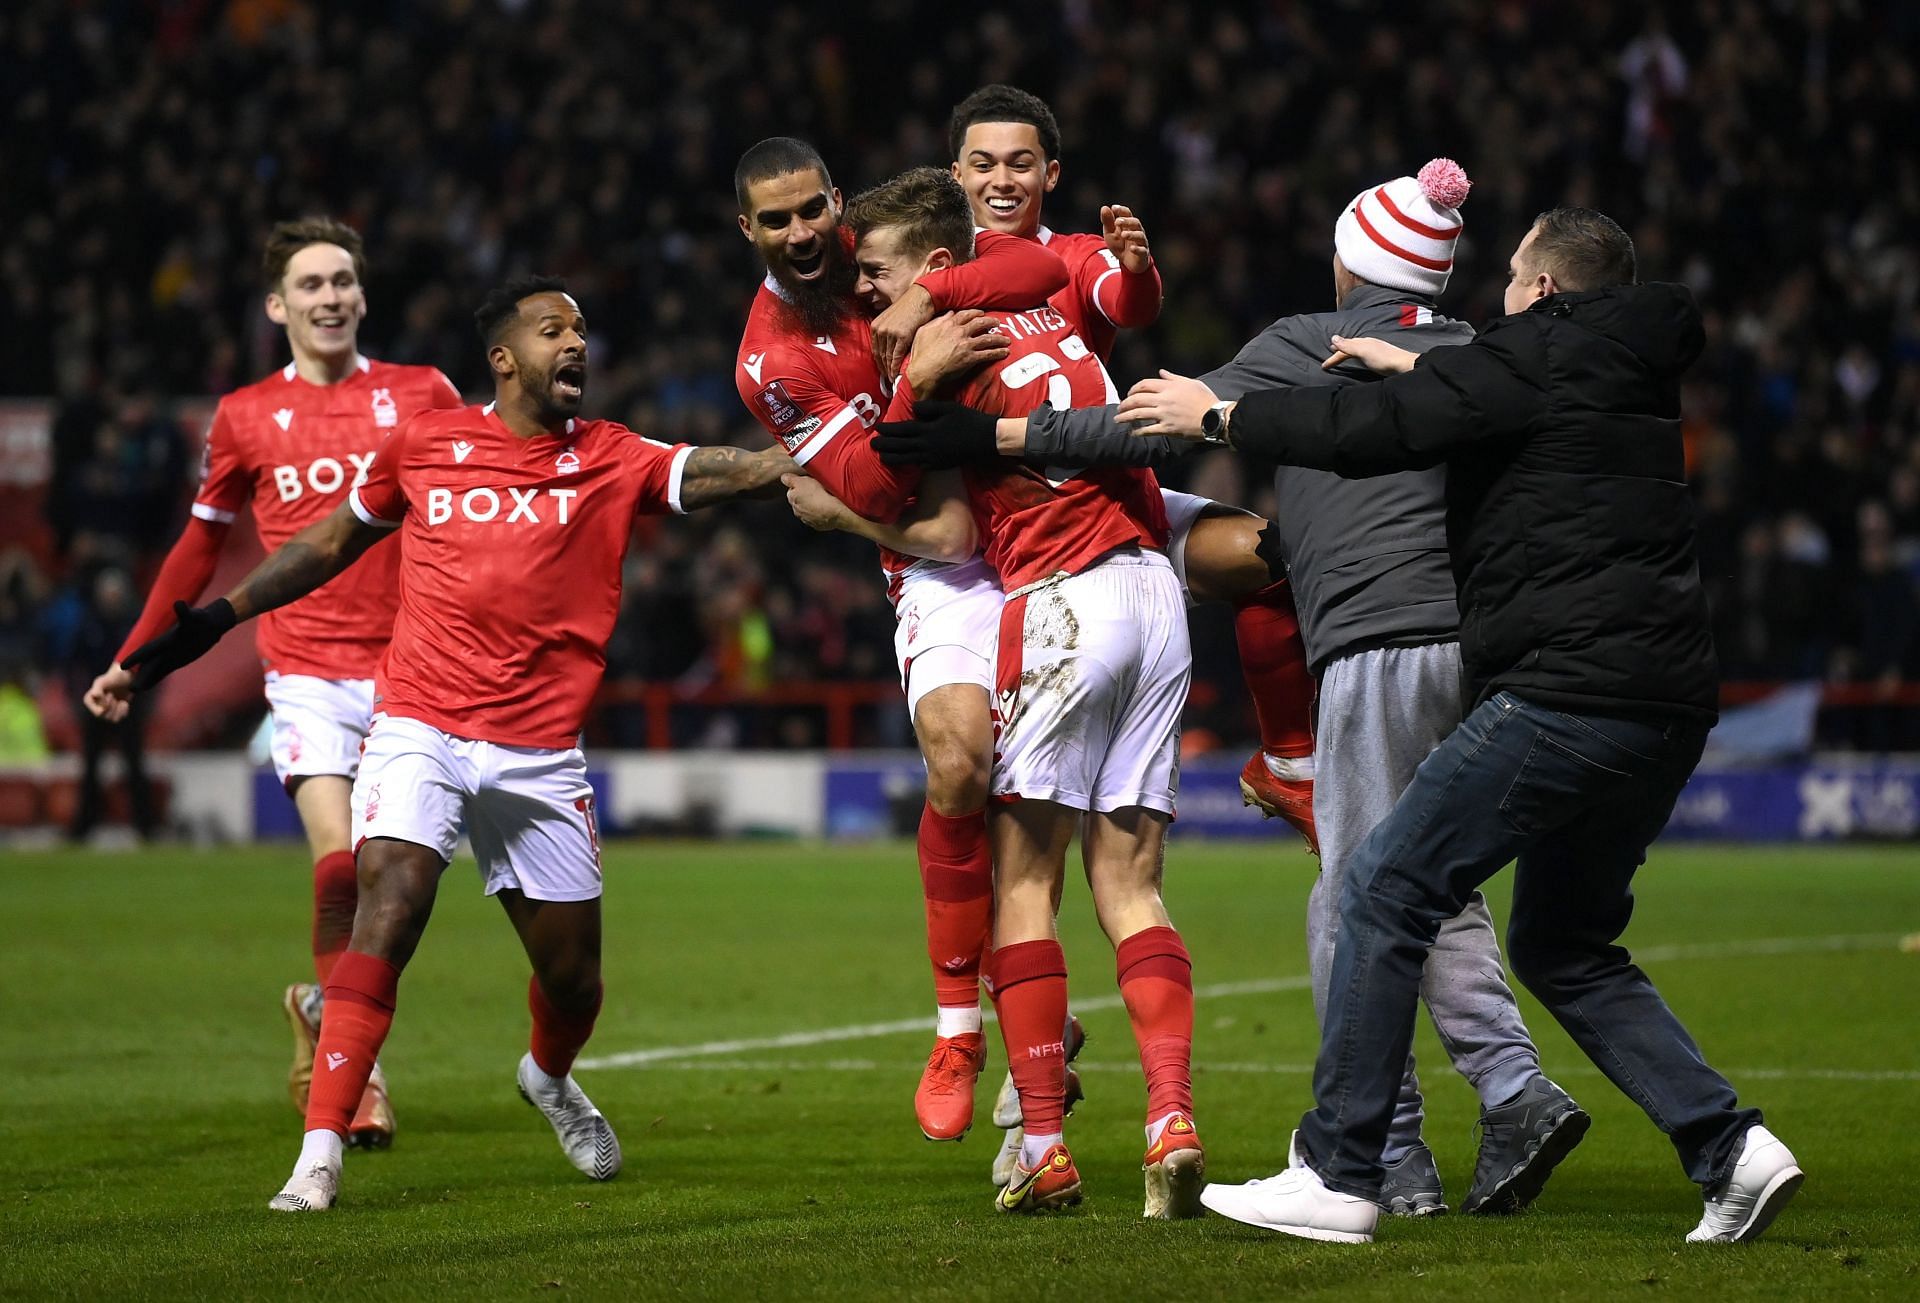 Nottingham Forest players celebrate after scoring against Arsenal.